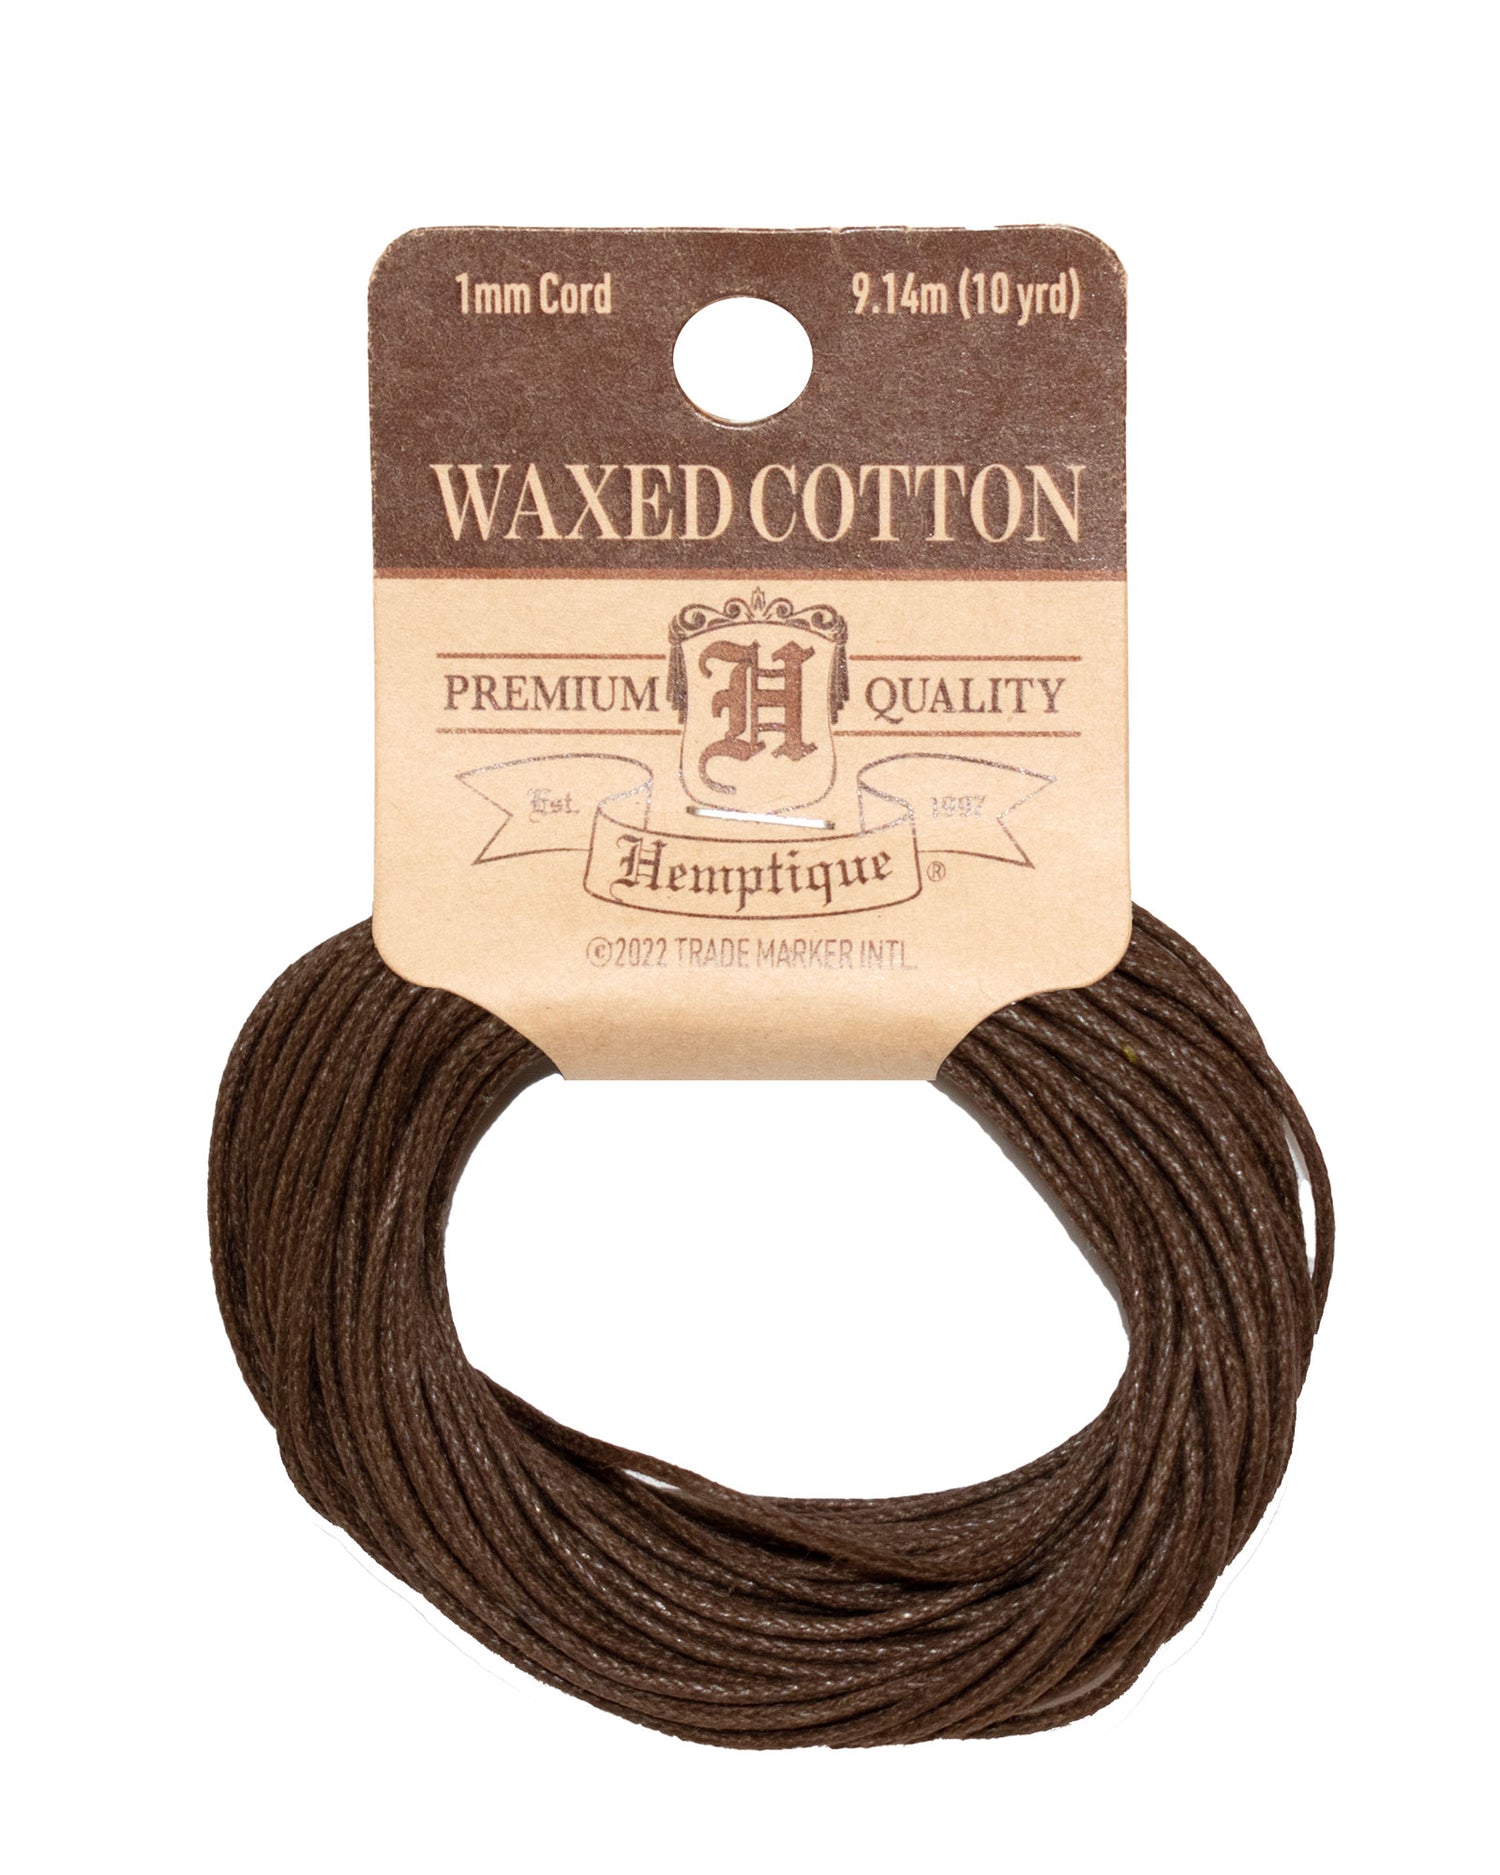 Waxed Cotton Cord Coil 1mm Brown